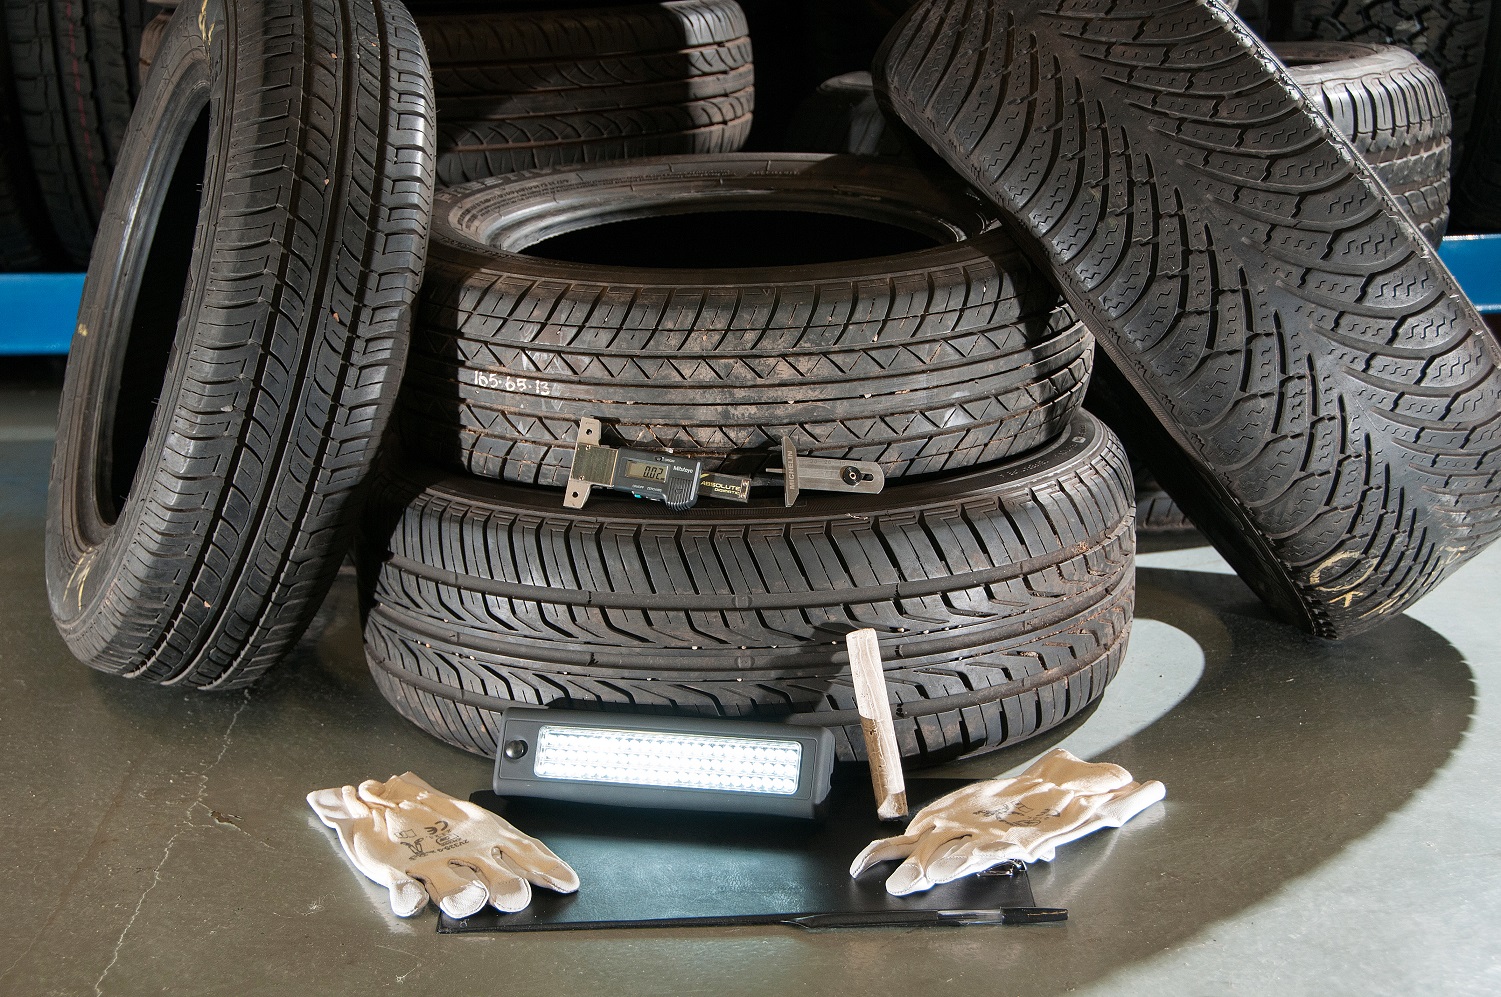 6 part worn tyre retailers convicted in a week for sale of dangerous tyres